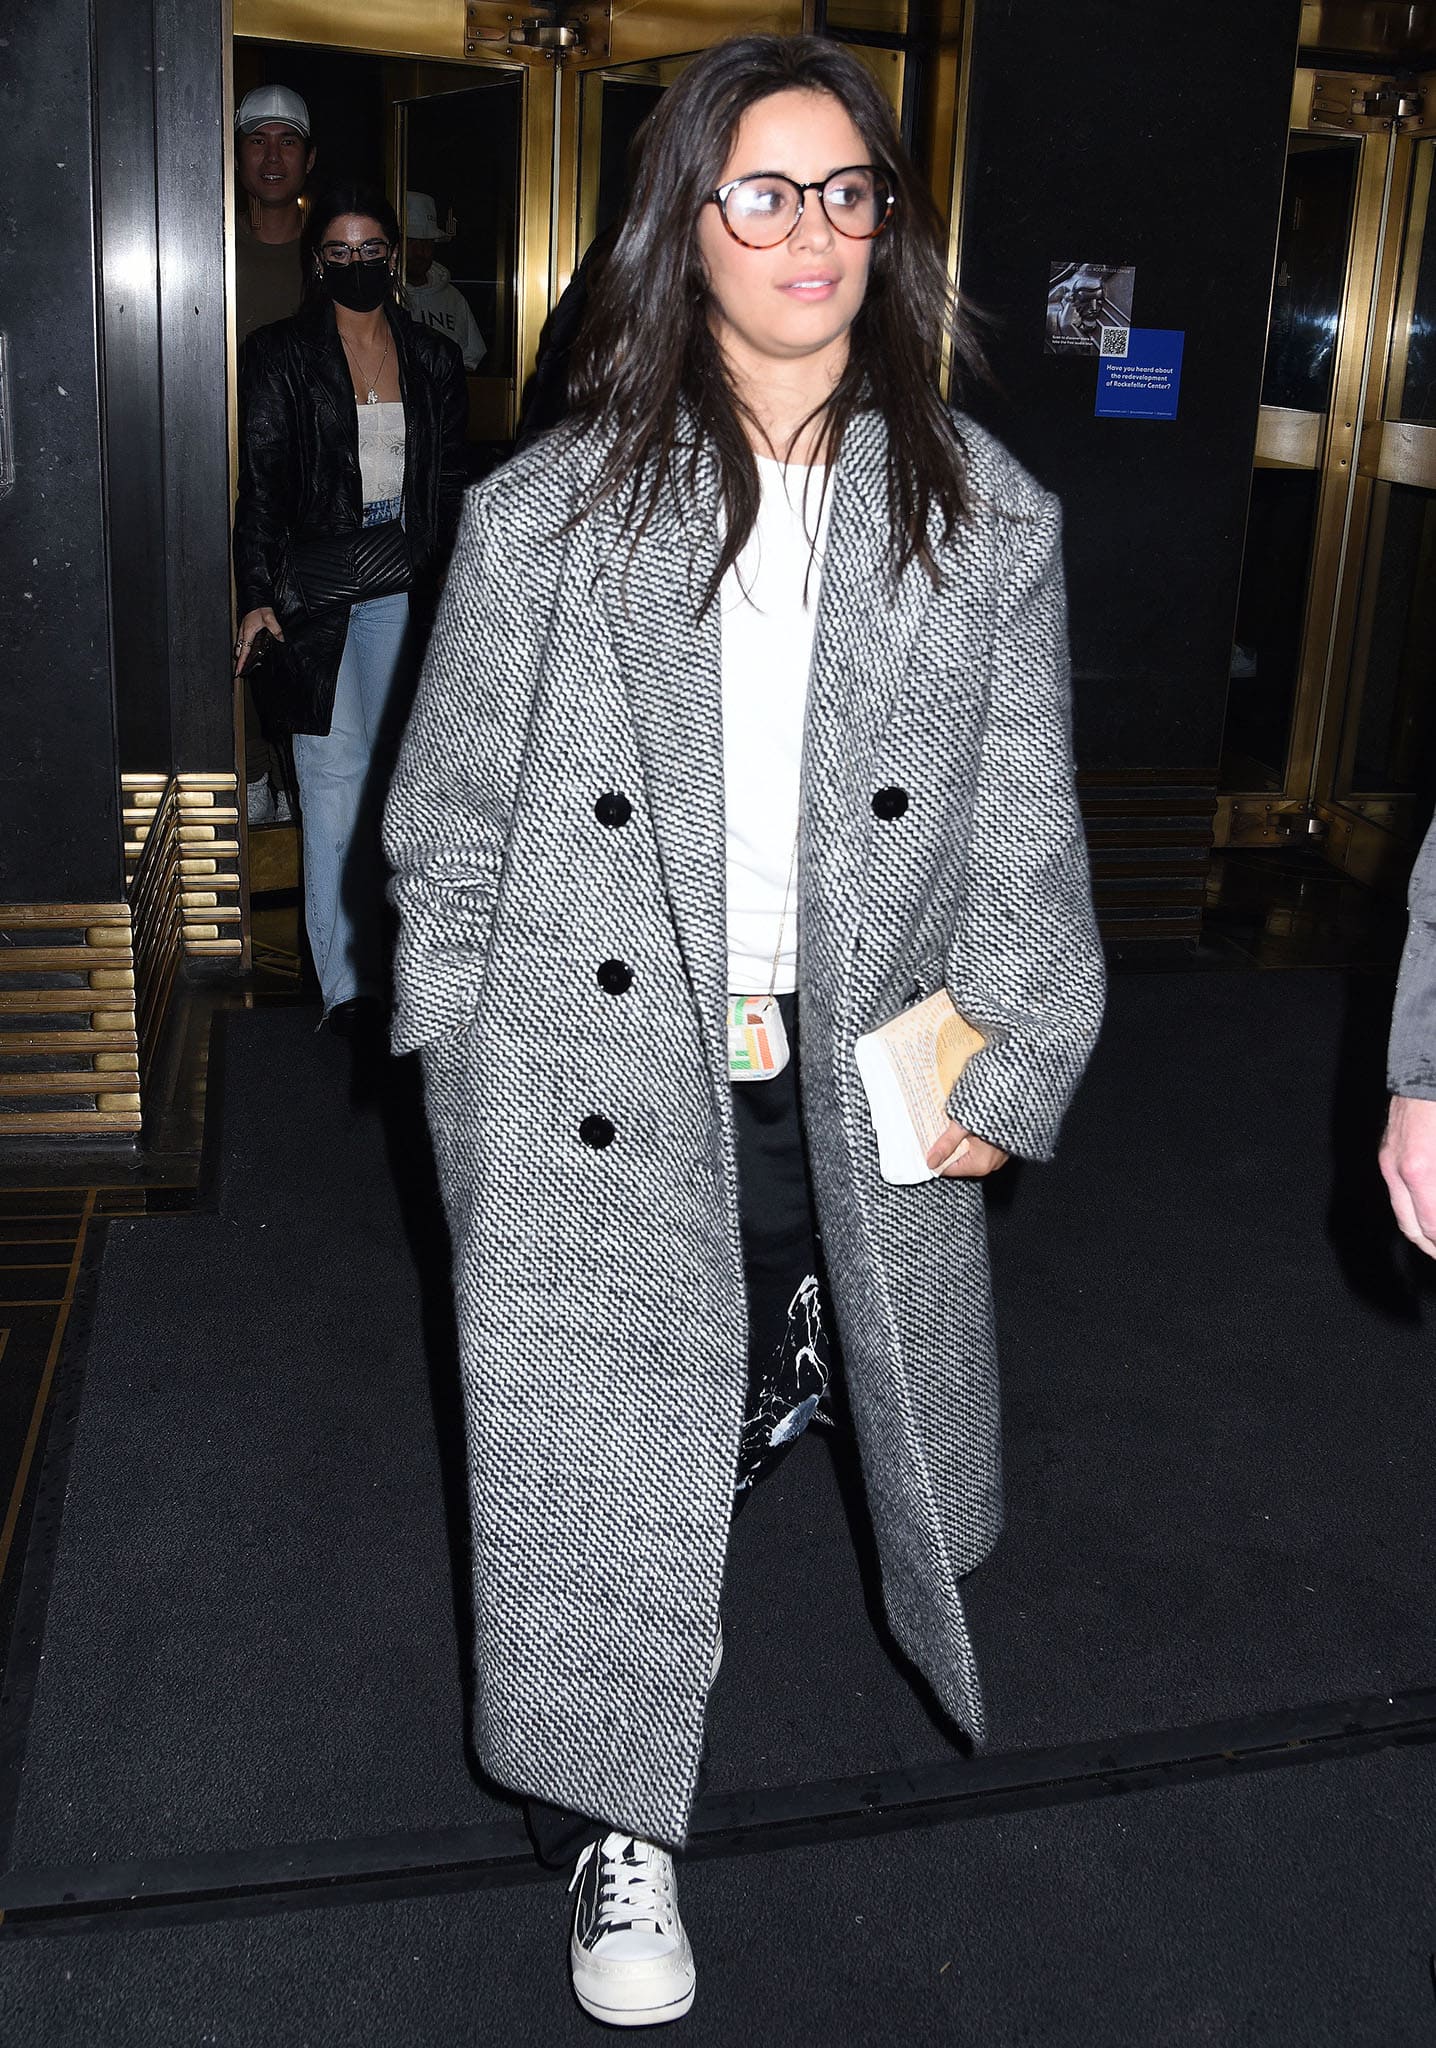 Camila Cabello heading to The Tonight Show Starring Jimmy Fallon in Balenciaga paint splatter track pants and a tweed coat